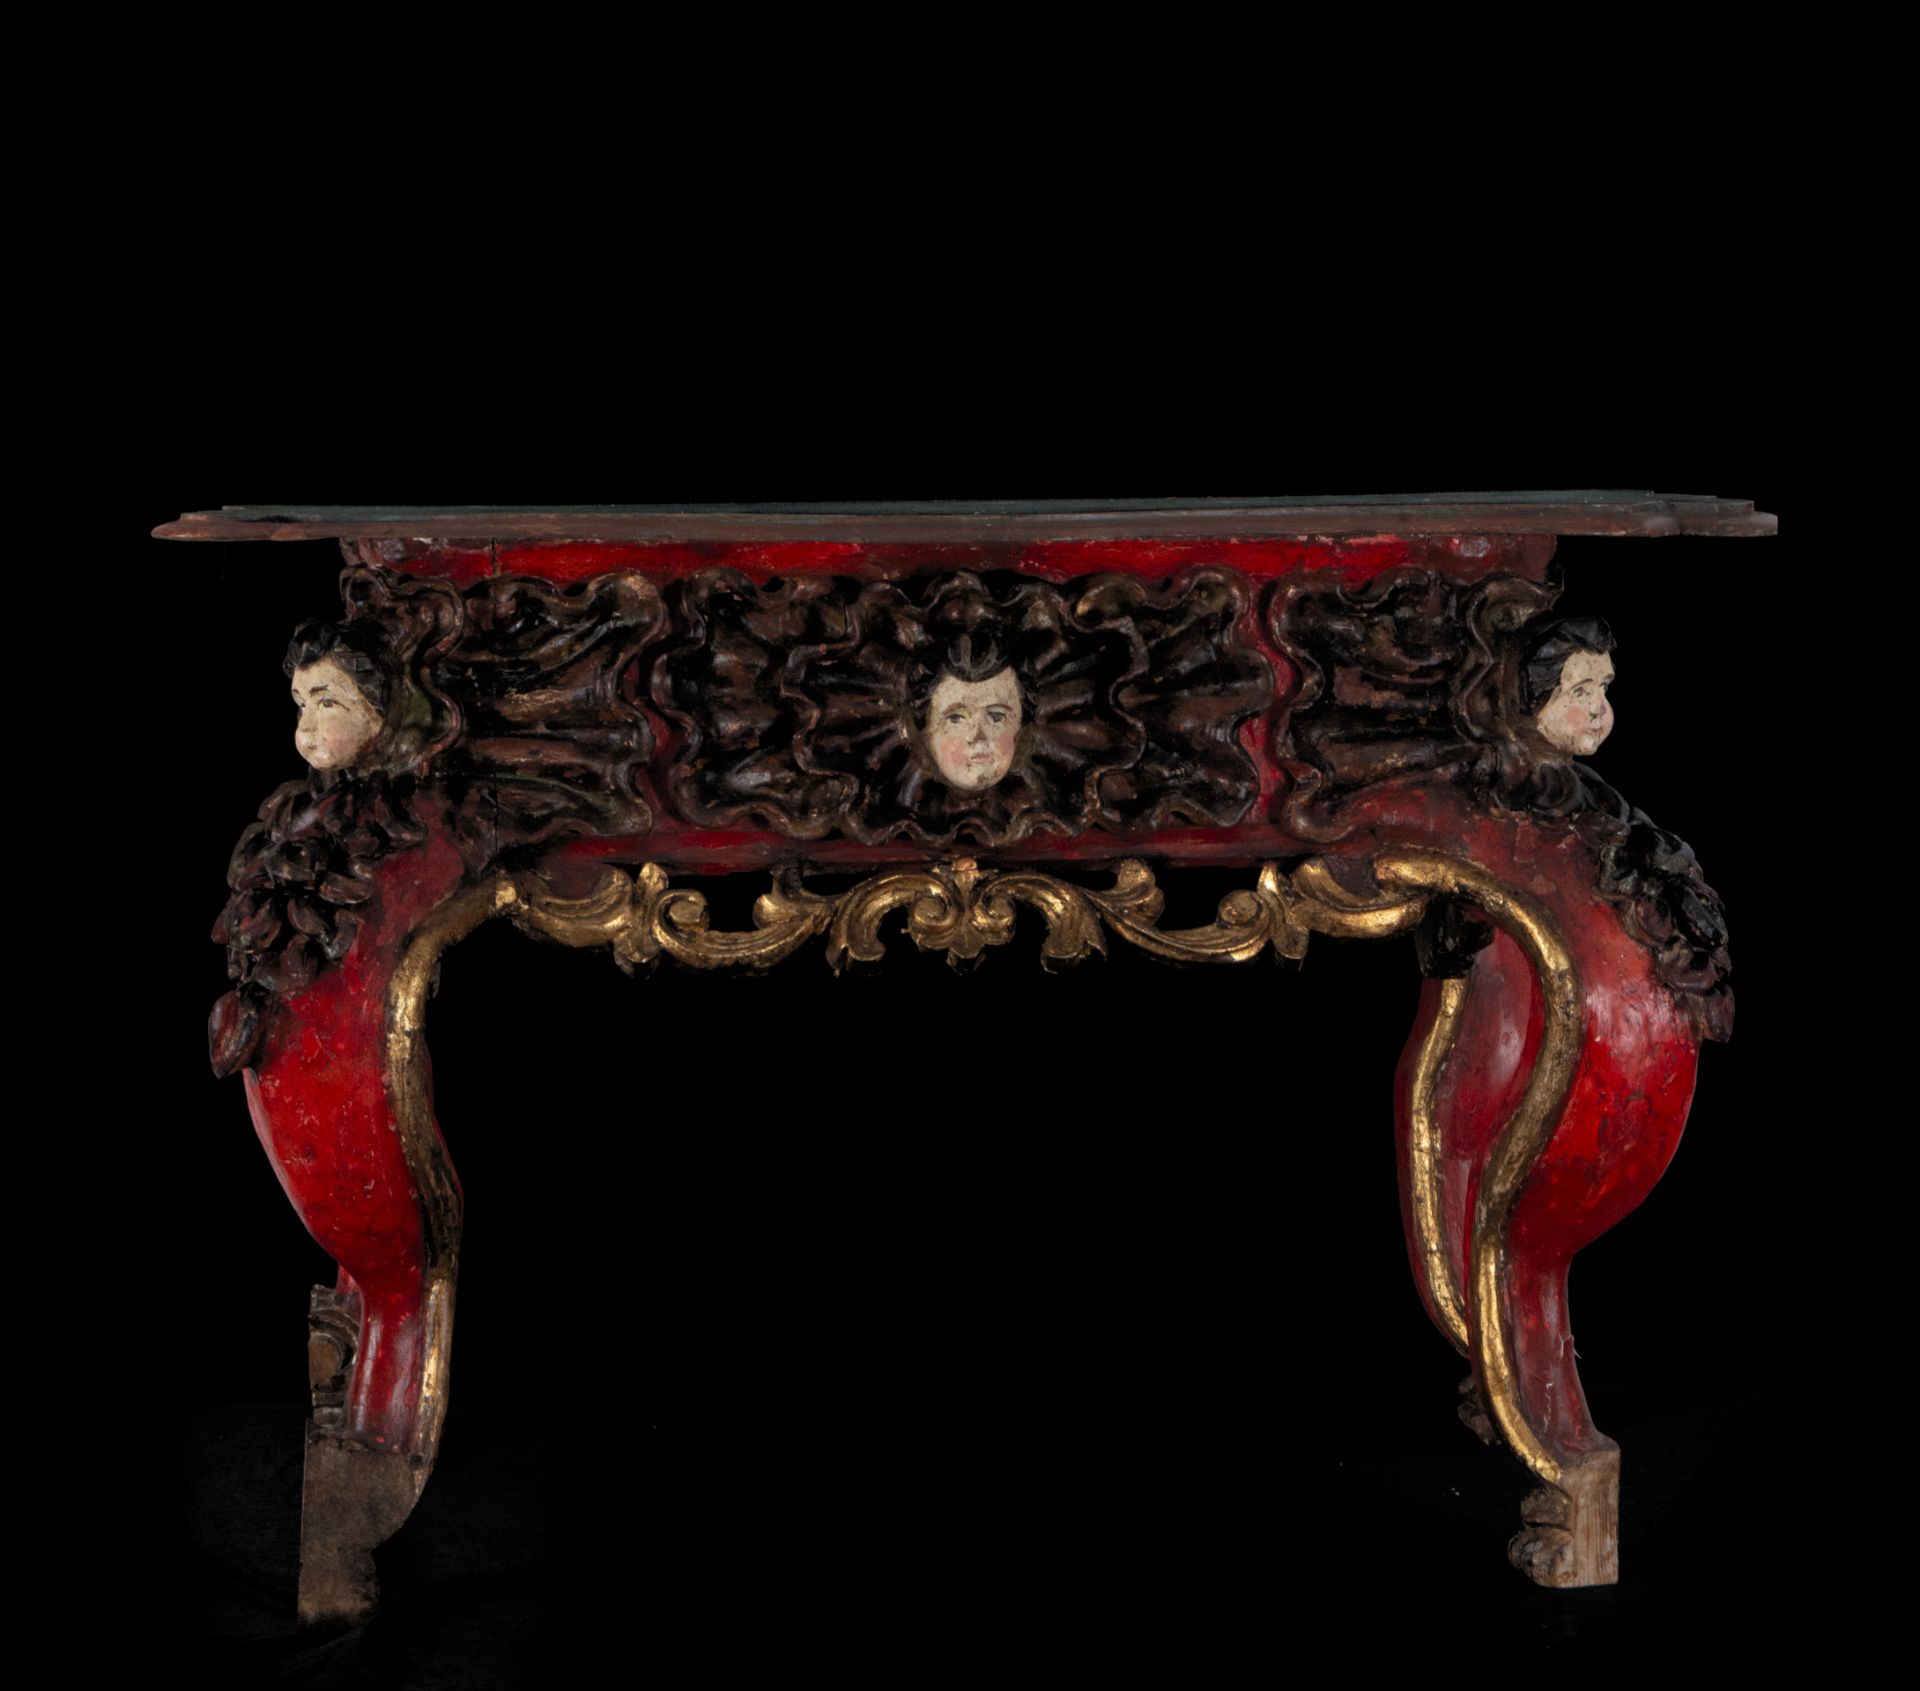 Novohispana Console in polychrome wood with Cherub finials, Mexican colonial work from the 18th cent